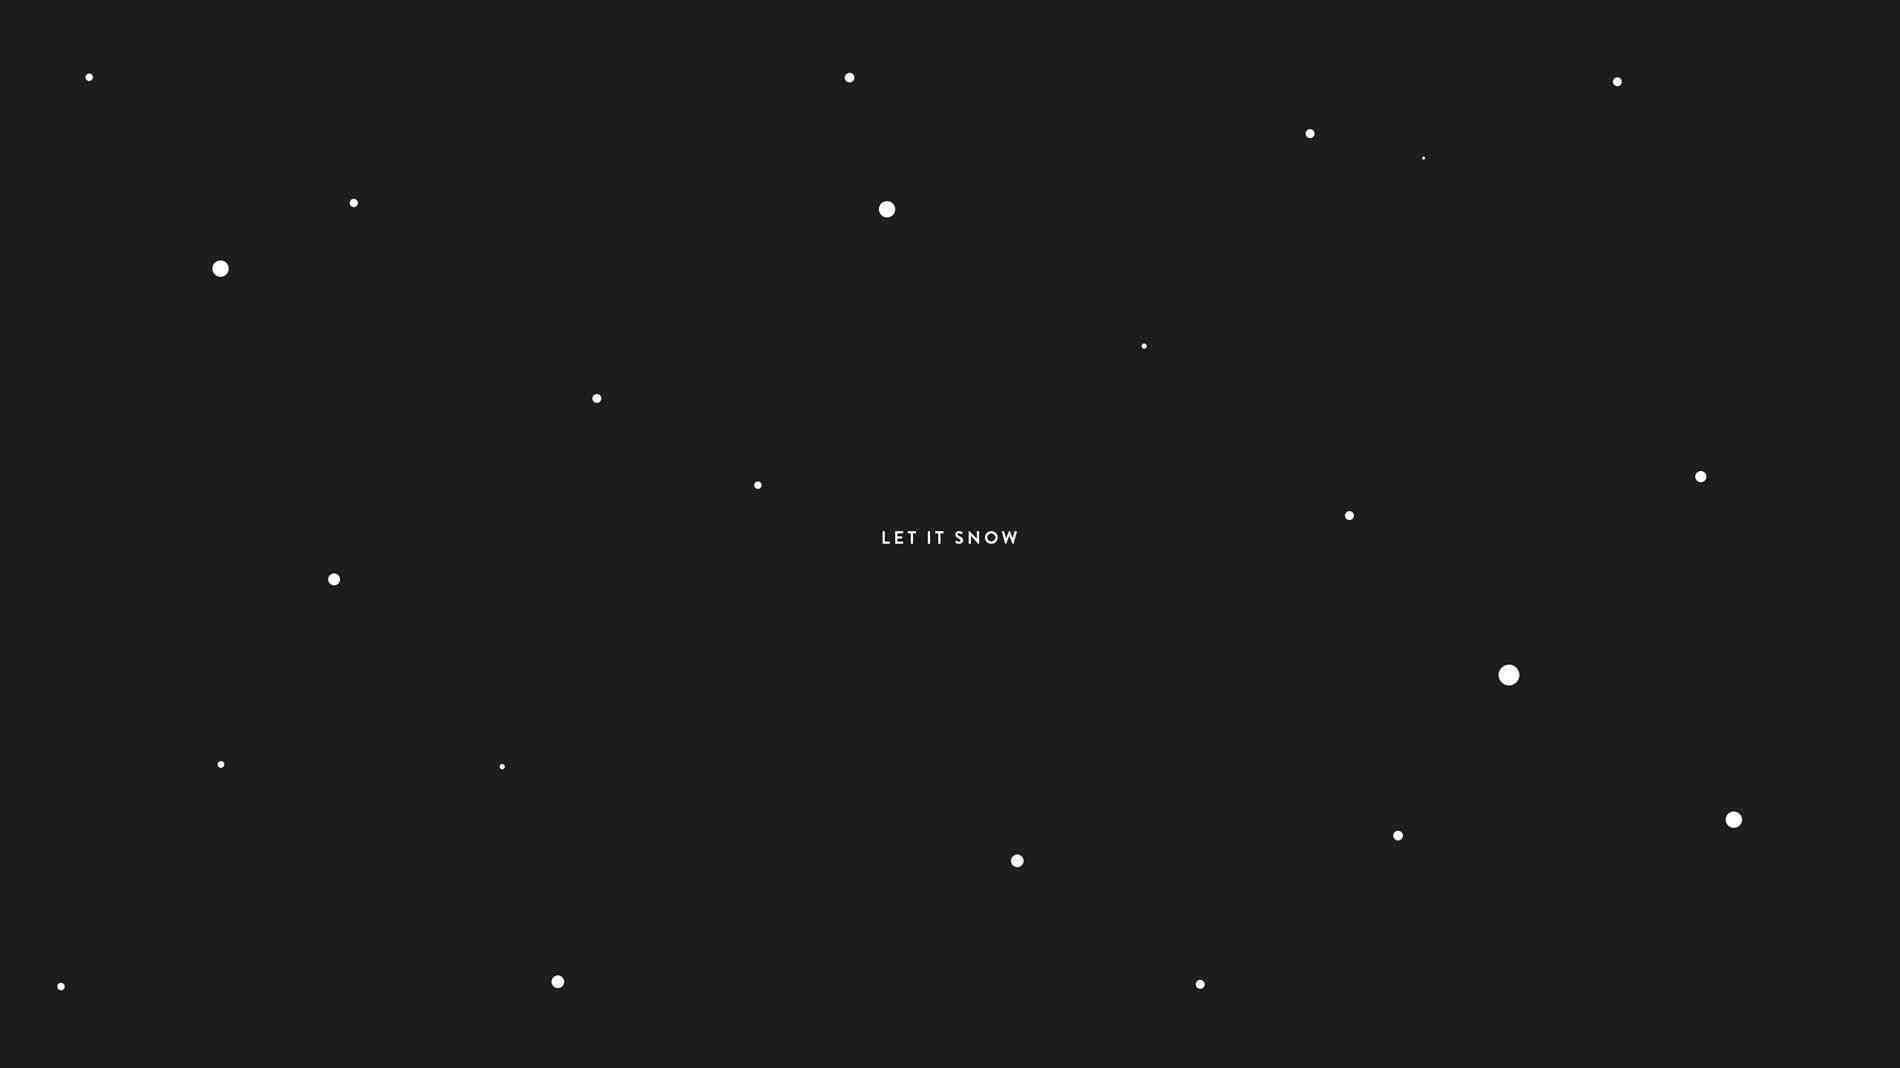 Let It Snow Aesthetic Black And White Laptop Wallpaper